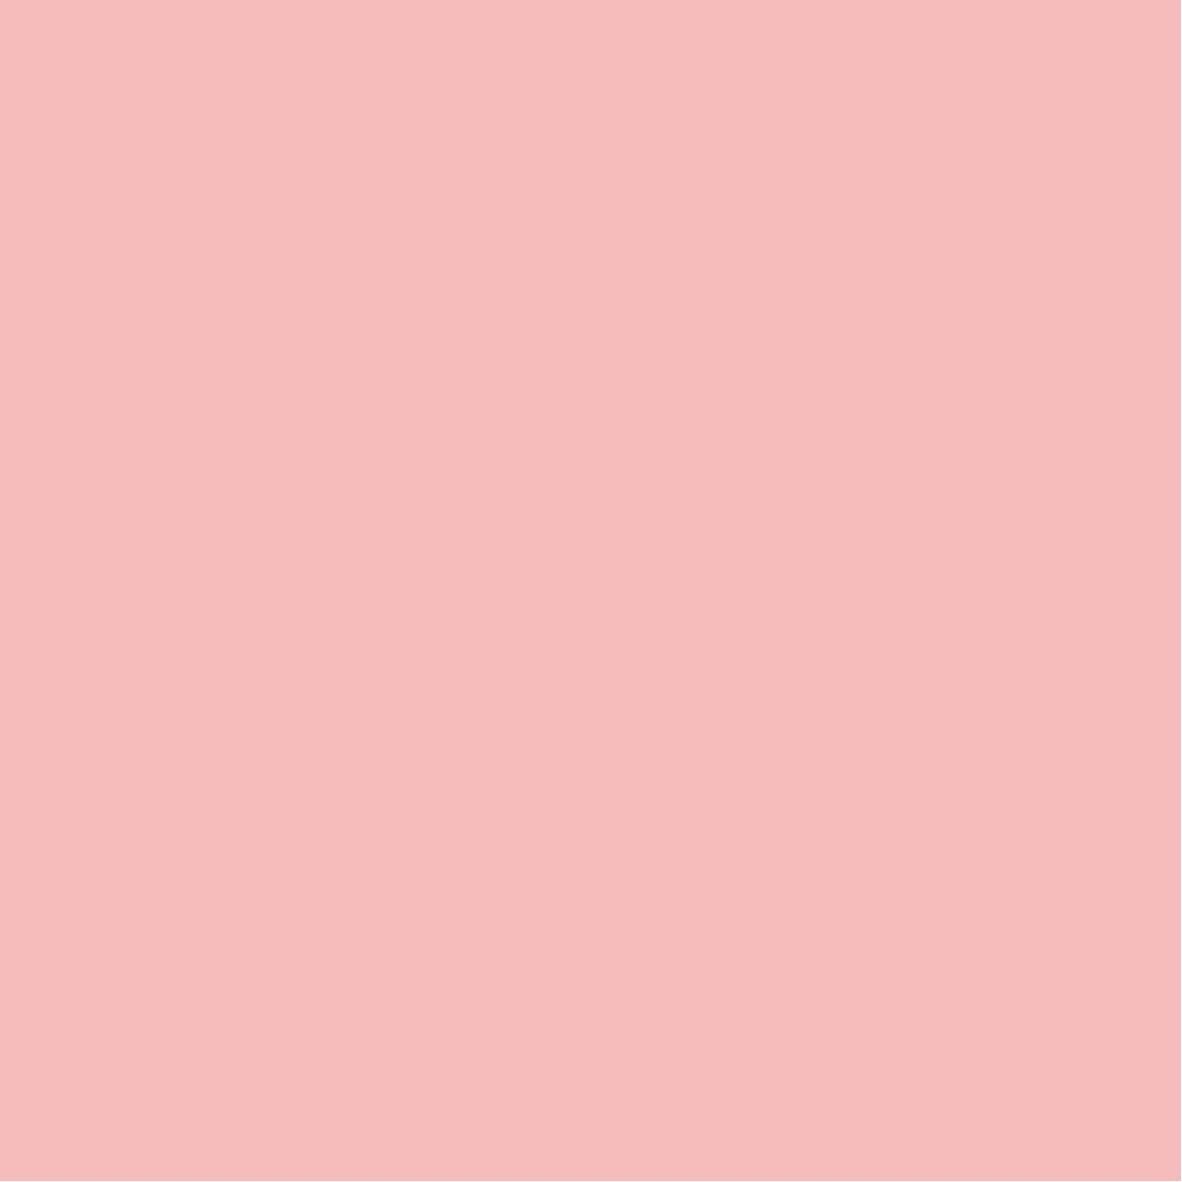 Solid Soft Warm Neutrals Instagram Highlight Cover. Pink aesthetic wallpaper, Neutral instagram, Pantone color